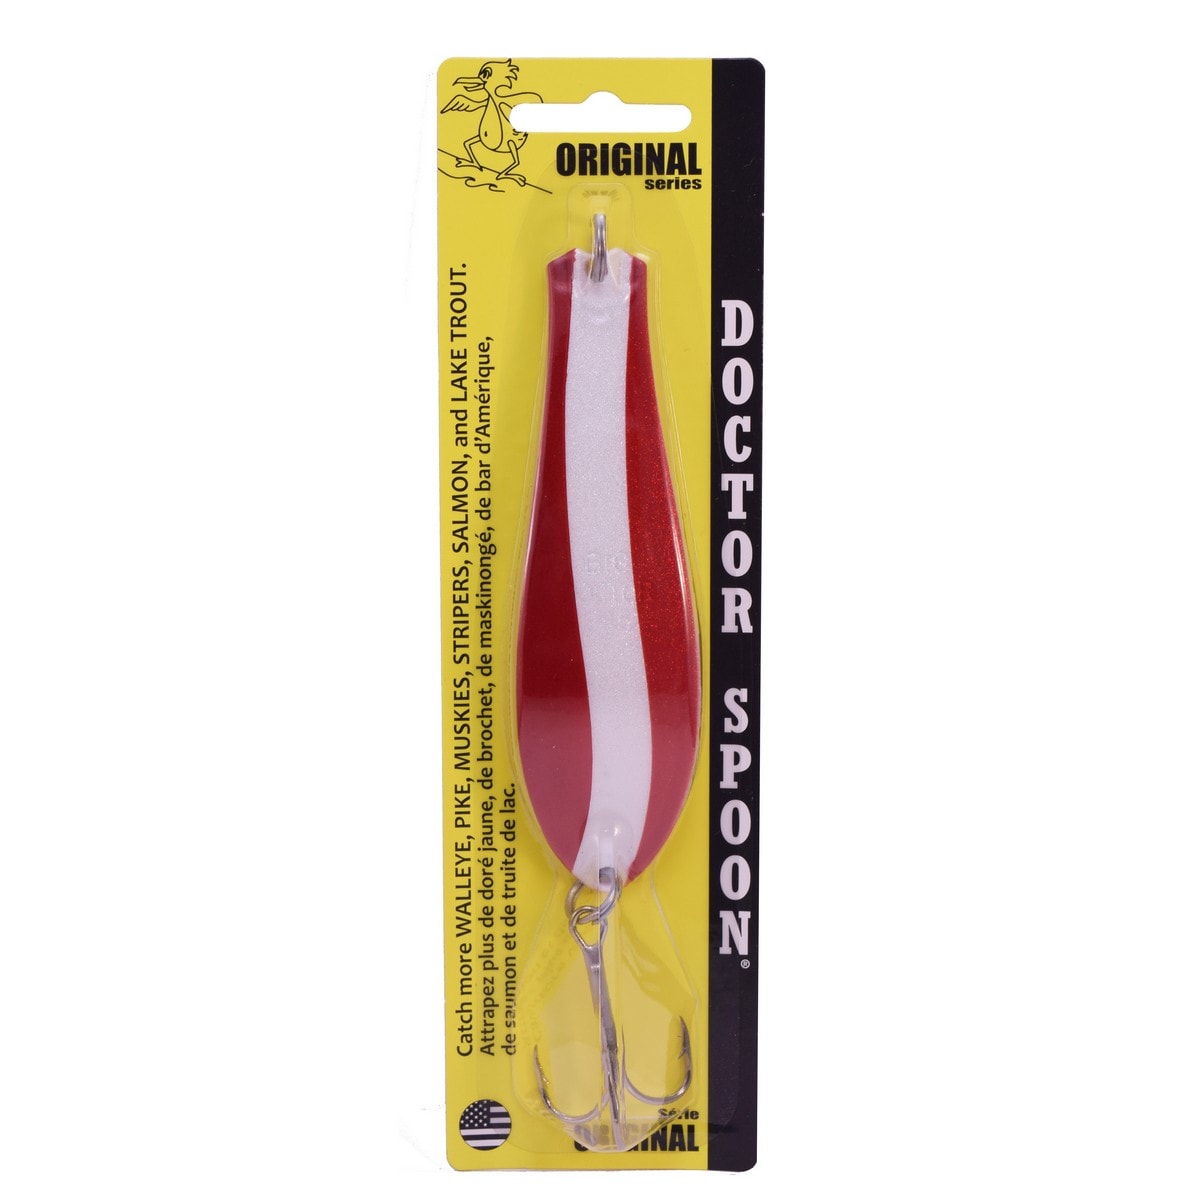 2 WHOLESALE Musky Pike Spoon 9 inch  Red White  Squid fishing lure lot  #05